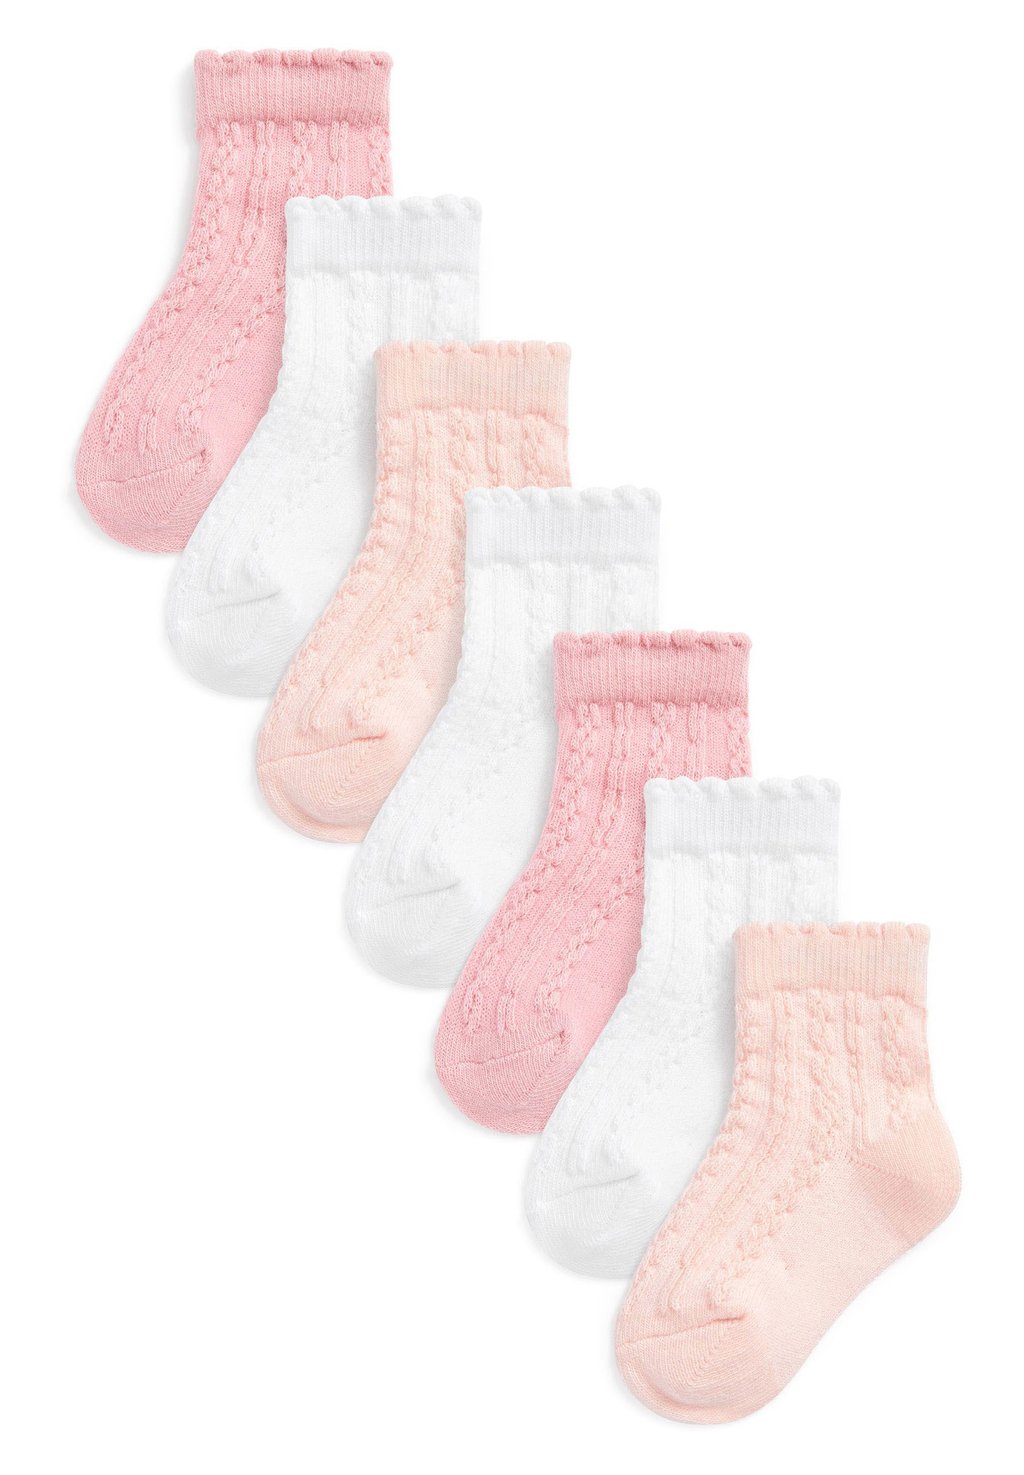 Носки 7 PACK Next, цвет pink/white cable knit кардиган zara kids cable knit patchwork knit песочный